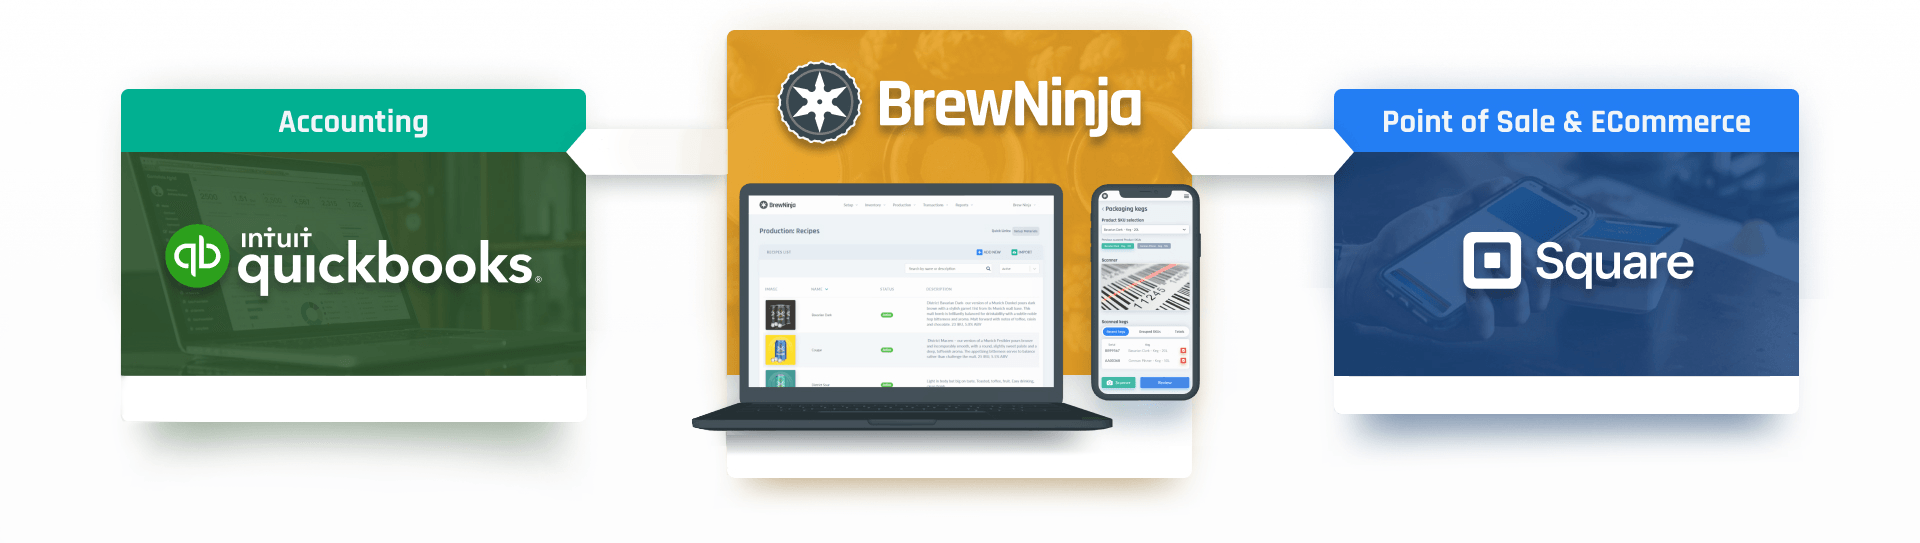 Brew Ninja integrates directly with QuickBooks Online and Square